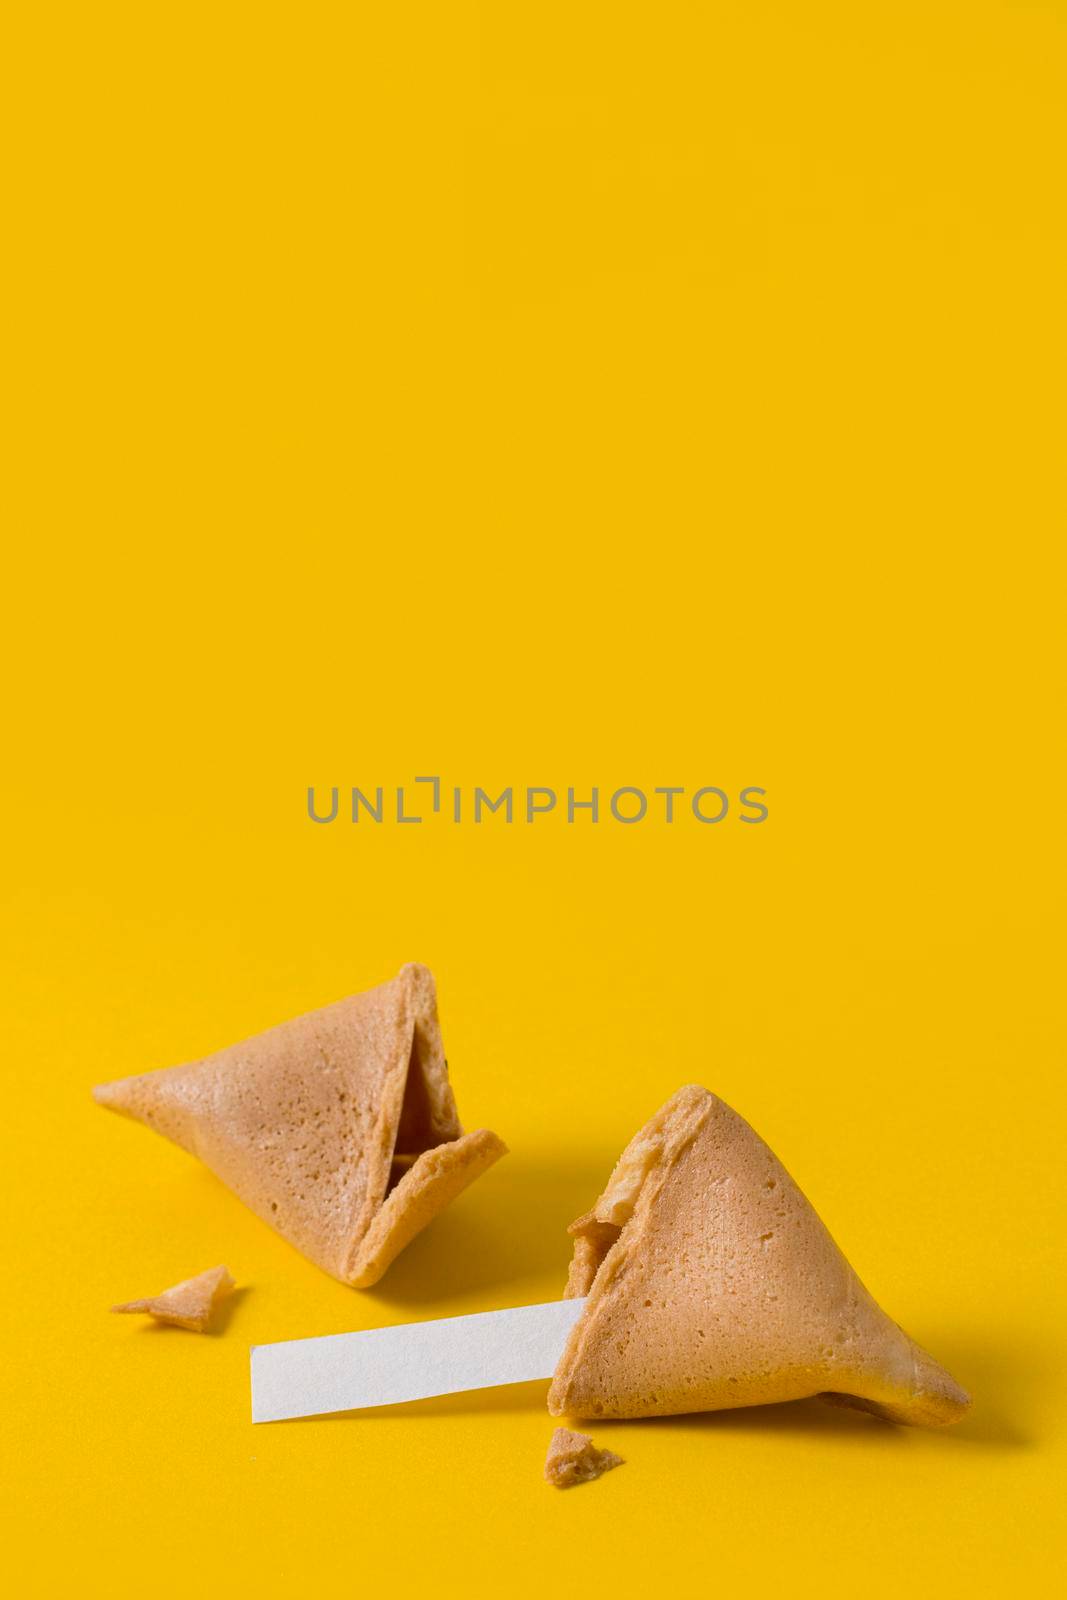 chinese new year with fortune cookies. High quality photo by Zahard